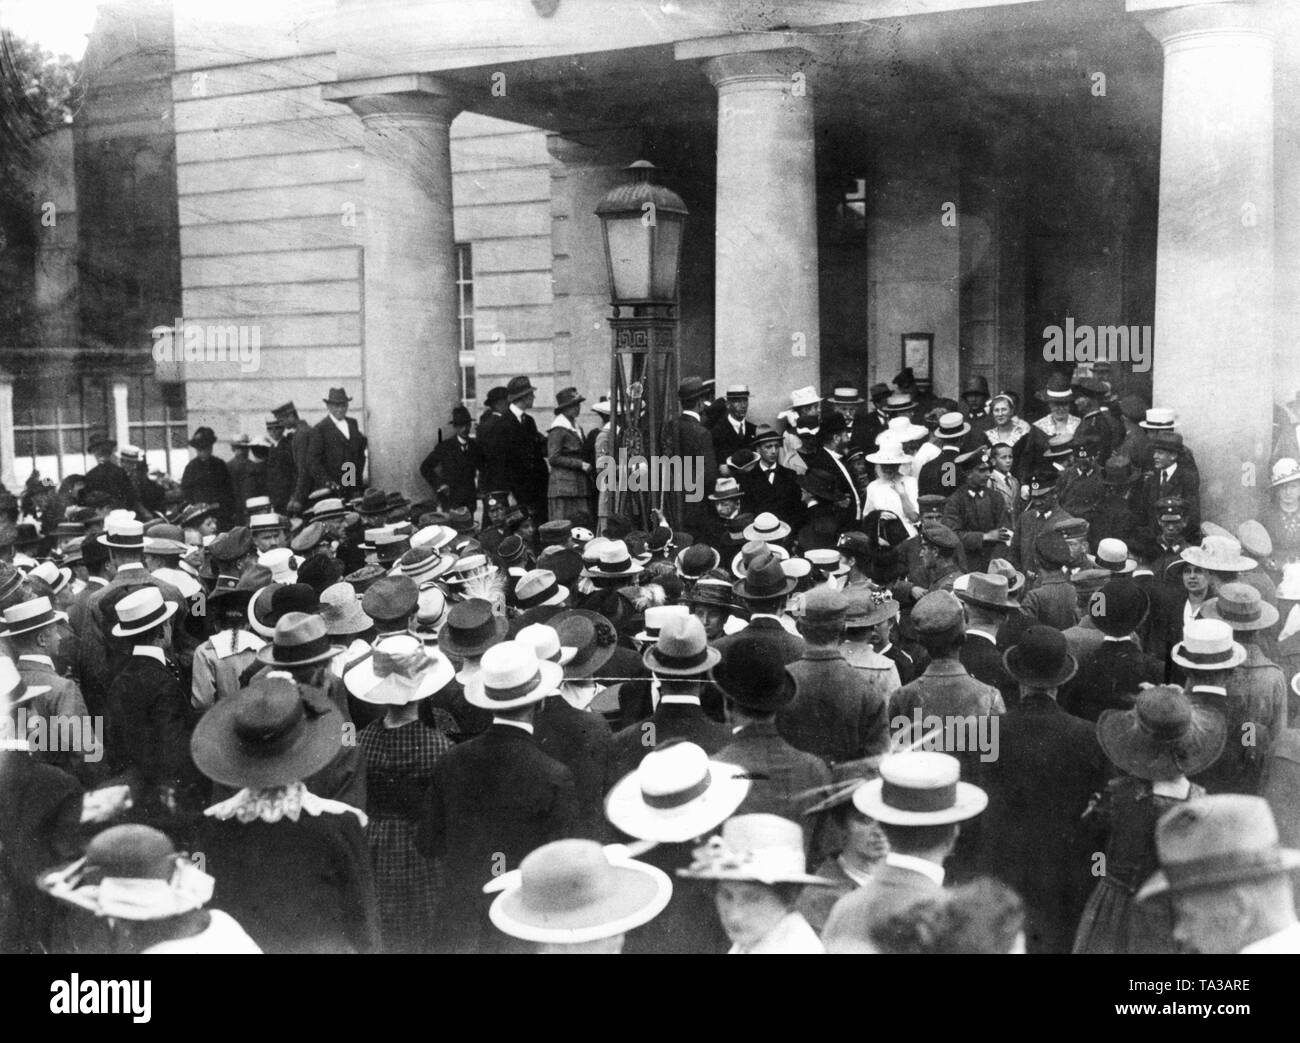 Prime Minister Philipp Heinrich Scheidemann speaks against the adoption of the Versailles Treaty. This dispute led to the break-up of the first government of the new republic and remained an everlasting issue until 1933. This photograph shows the agitated people waiting in front of the National Theater. Stock Photo